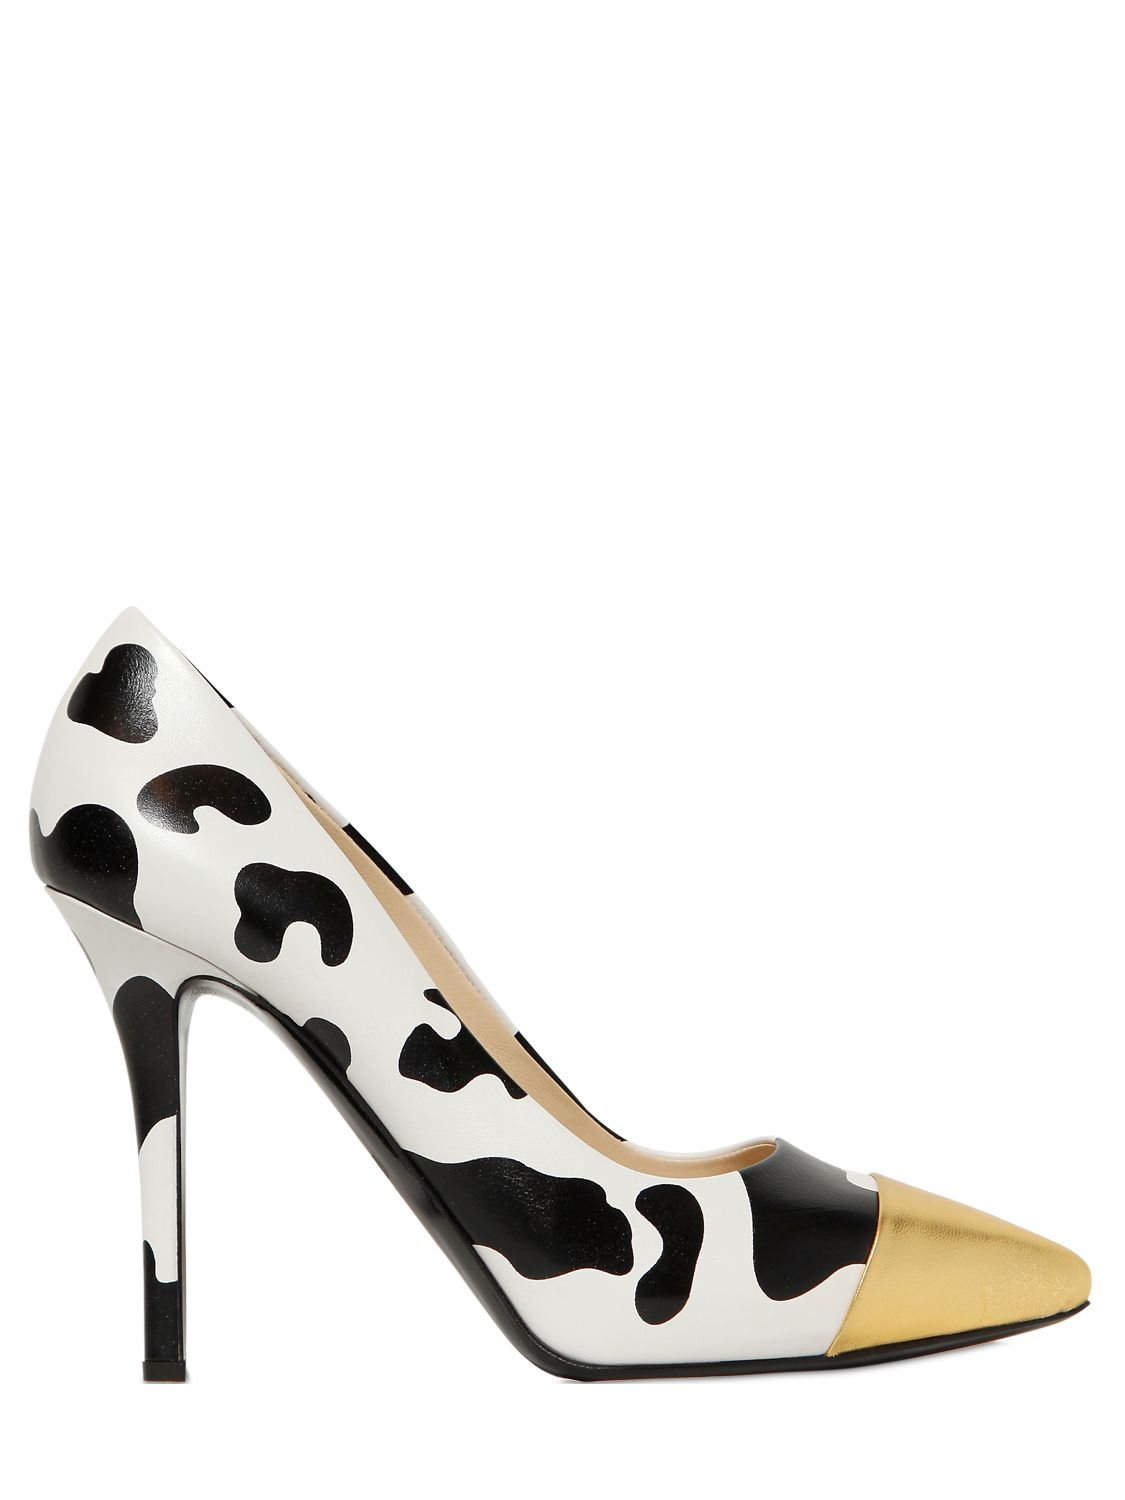 Lyst - Moschino 105Mm Cow Print Nappa Leather Pumps